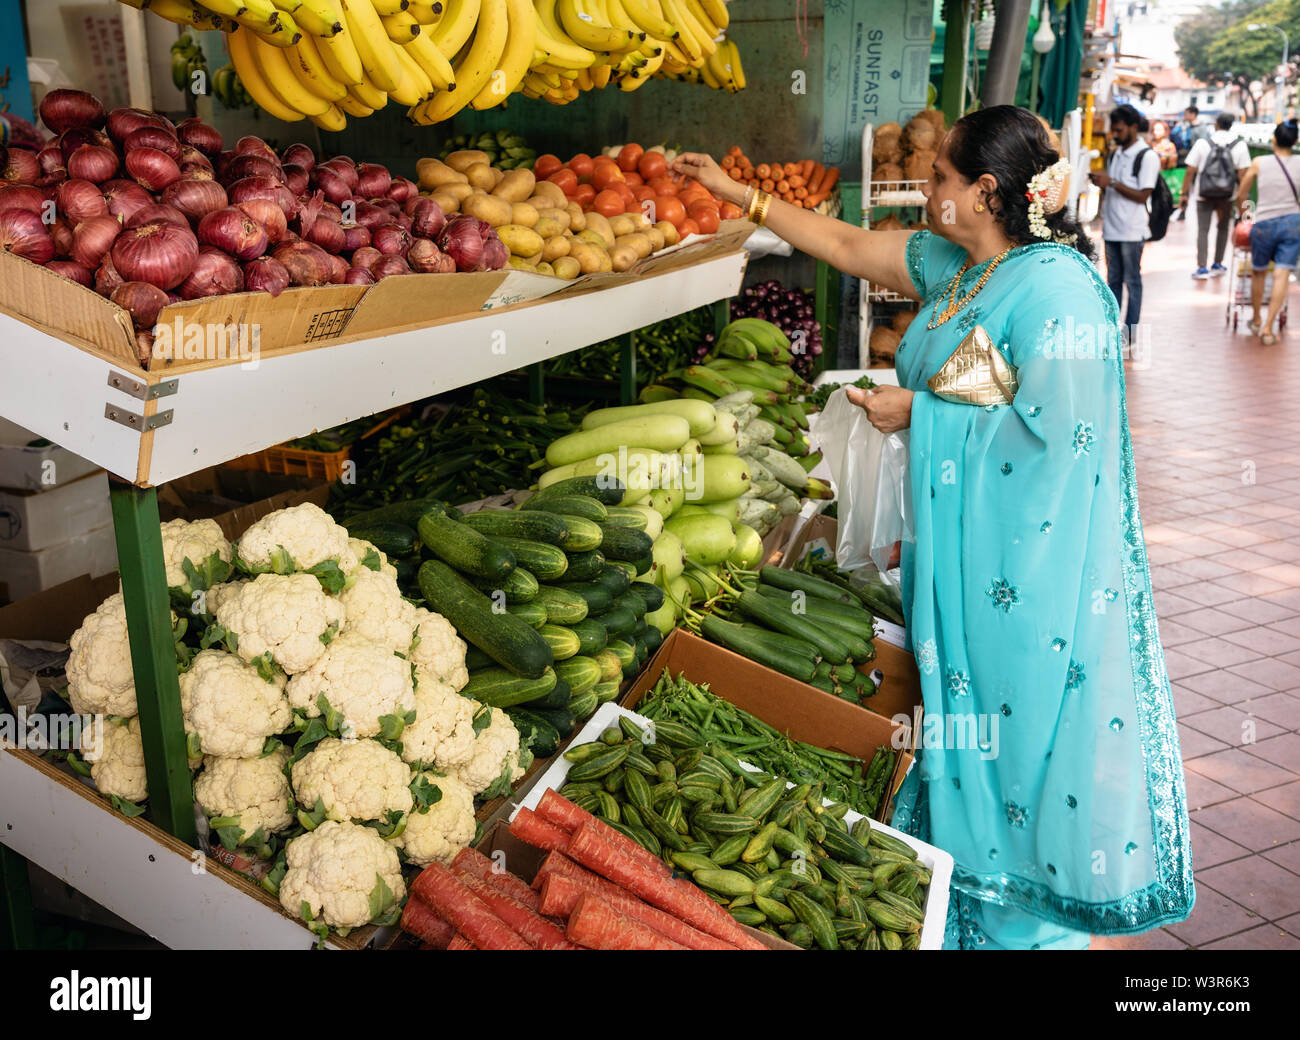 Chinatown, Singapore - February 9, 2019: Indian woman in saree buys fruits and vegetables at the market in Little India, Singapore Stock Photo